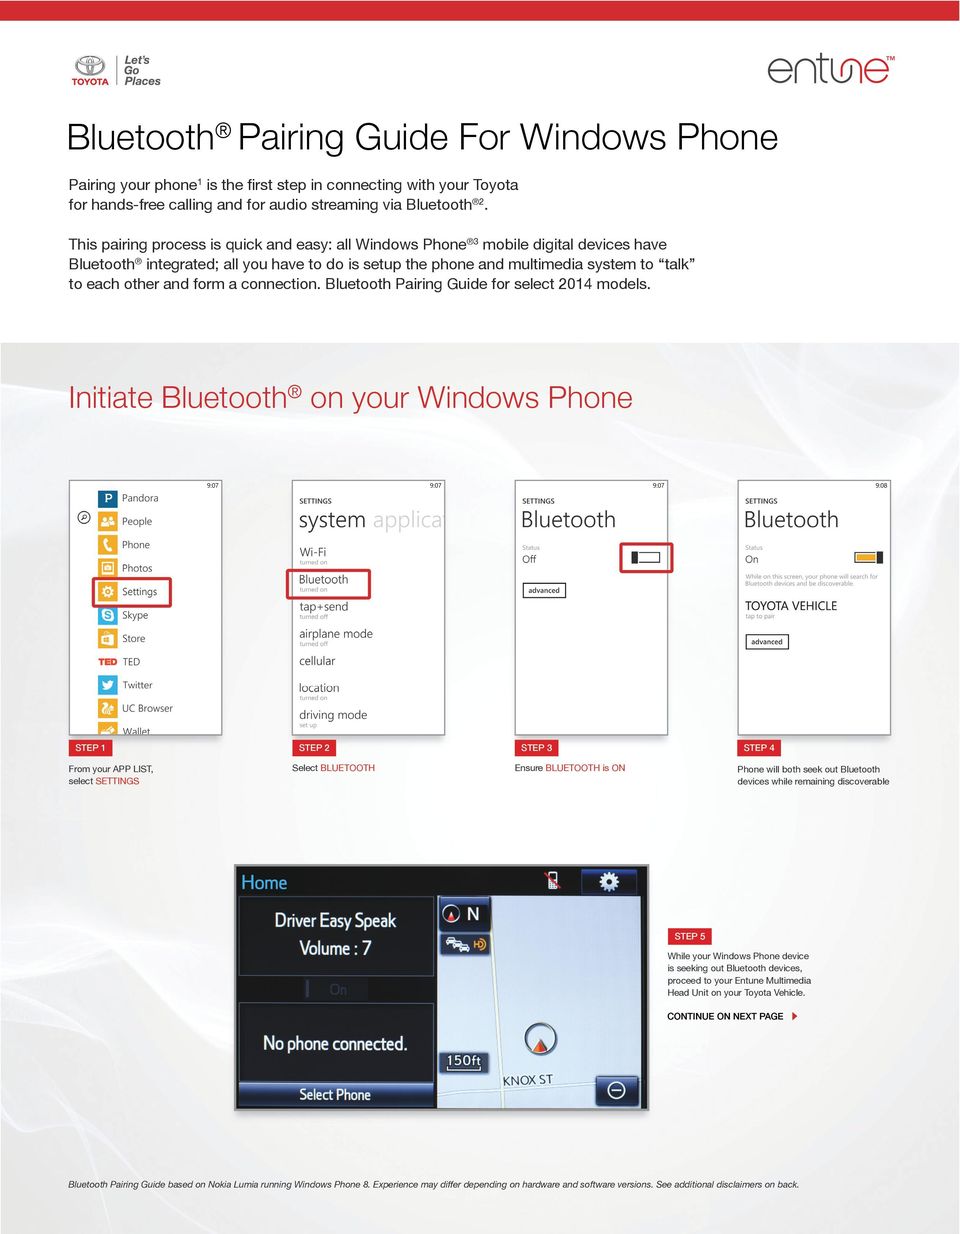 form a connection. Bluetooth Pairing Guide for select 2014 models.